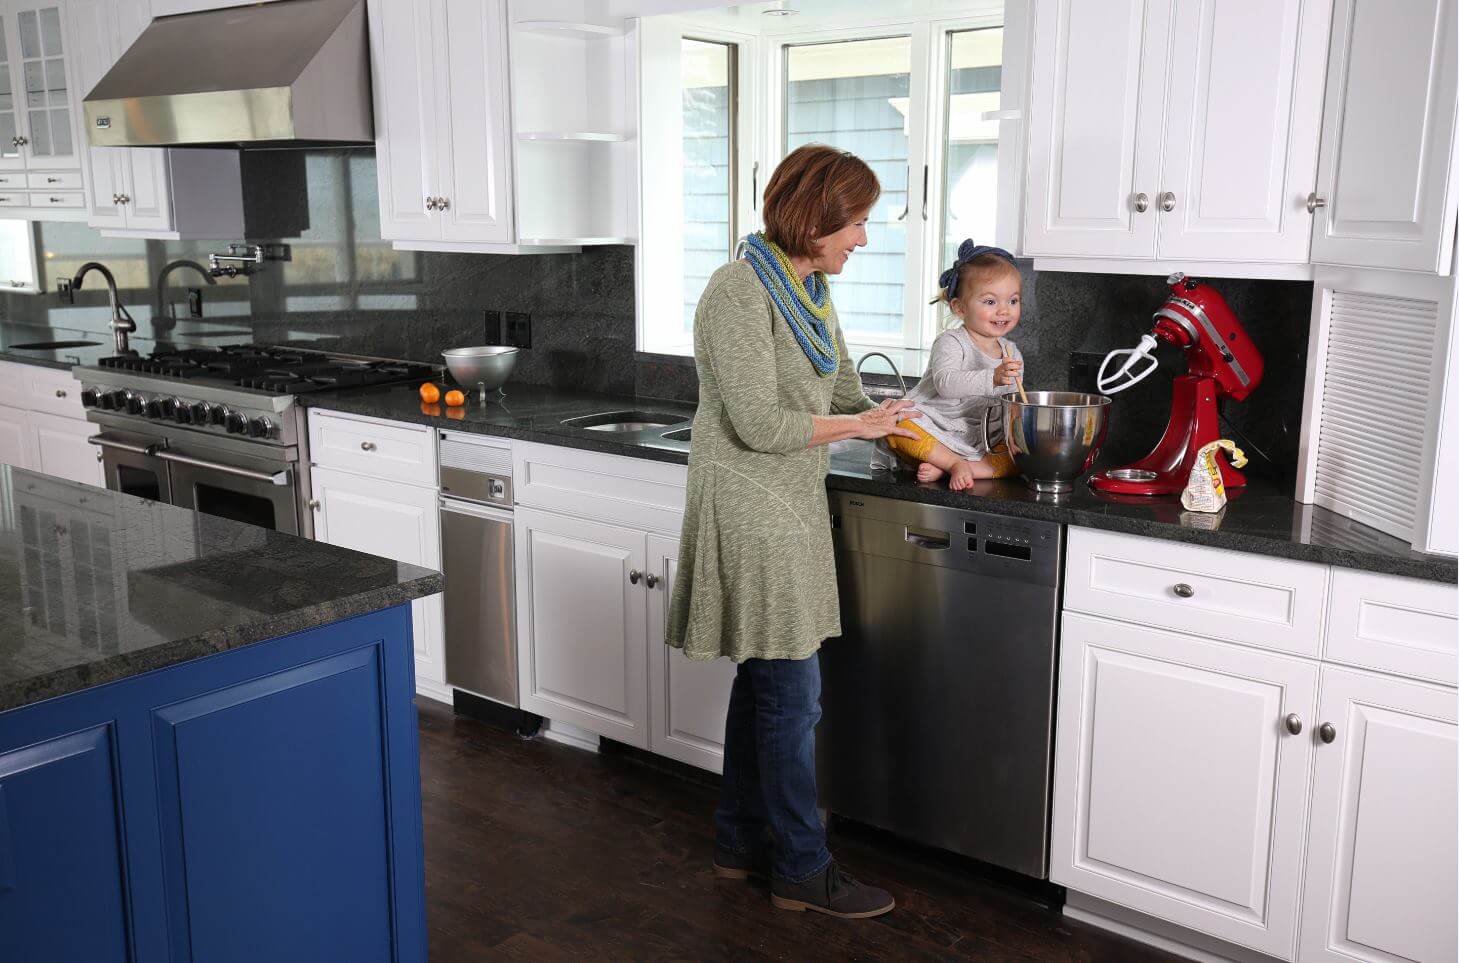 mother and baby in kitchen on counter